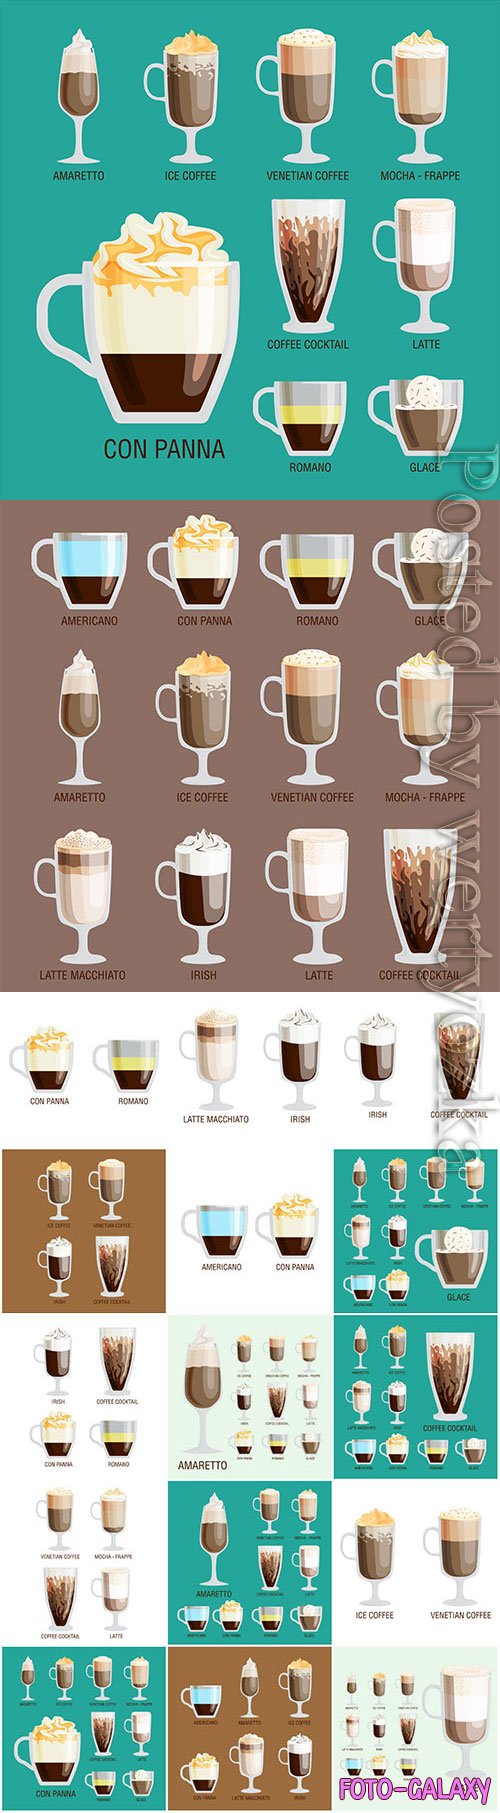 Coffee and coffee drinks in assortment in vector